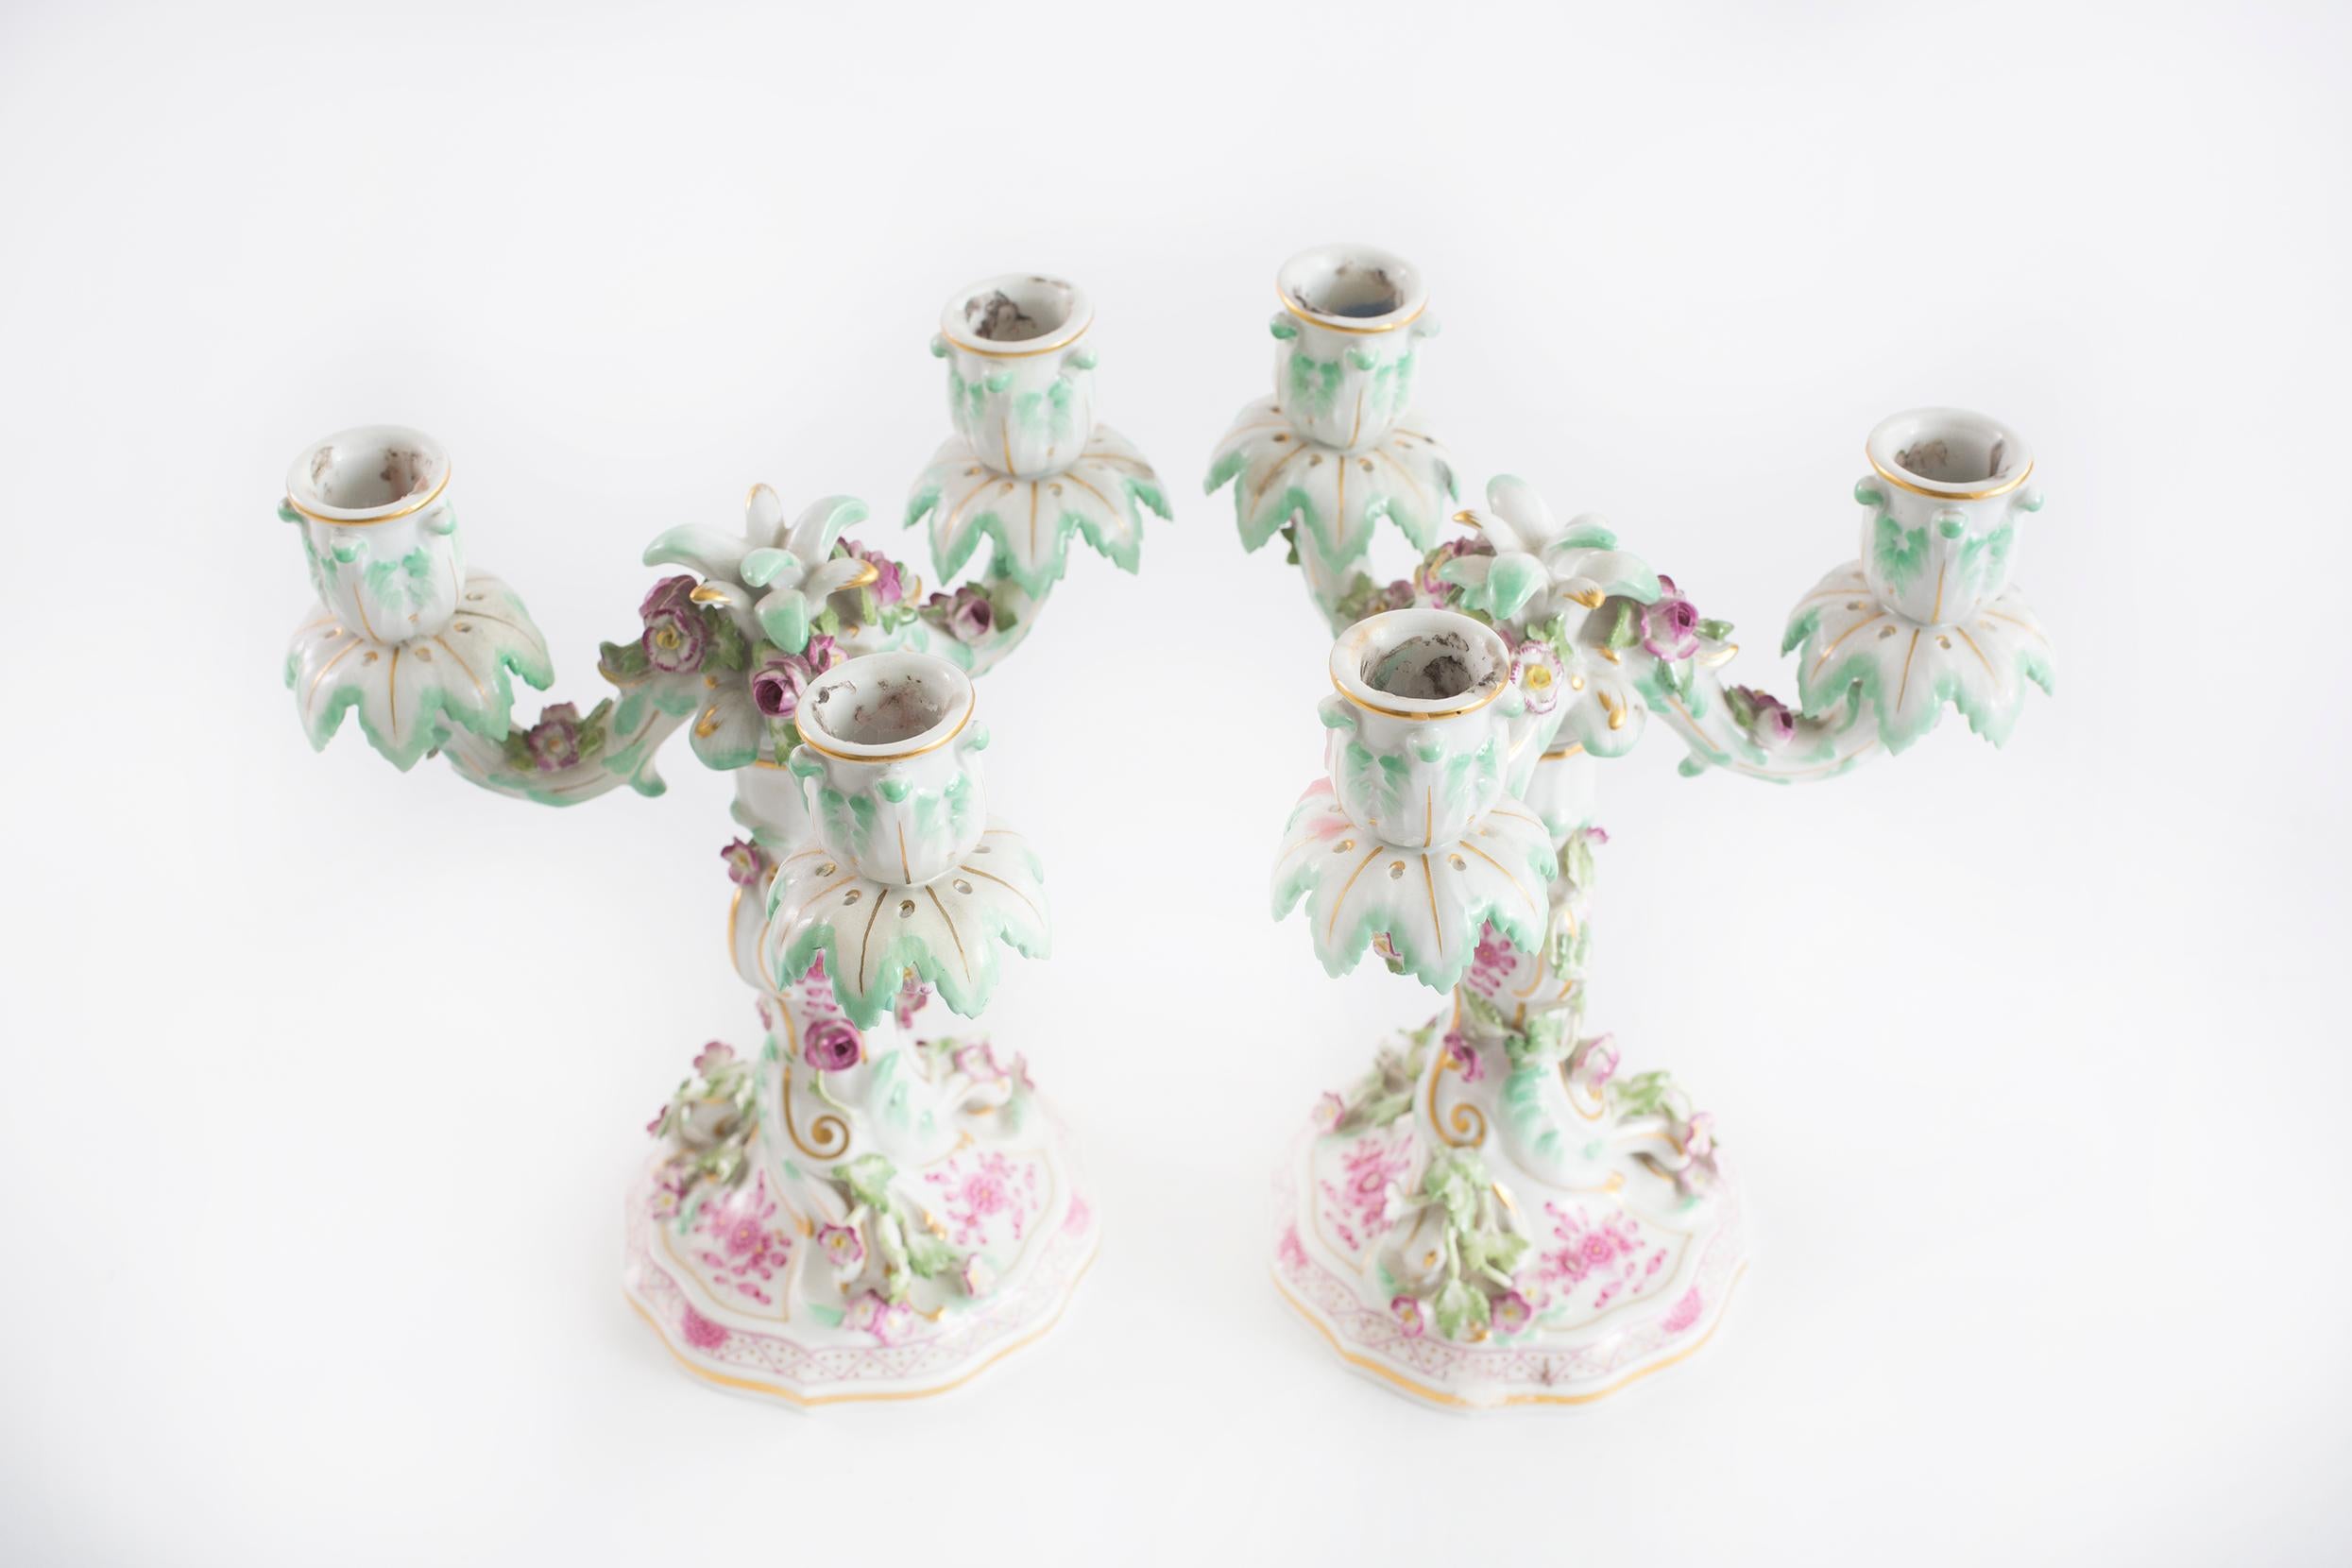 Beautiful pair Meissen blue crossed swords porcelain pair three arms candle holder with exterior floral design details. Each one is in great condition. Maker's mark undersigned. Minor wear consistent with age / use. Each one stand about 9 1/2 inches